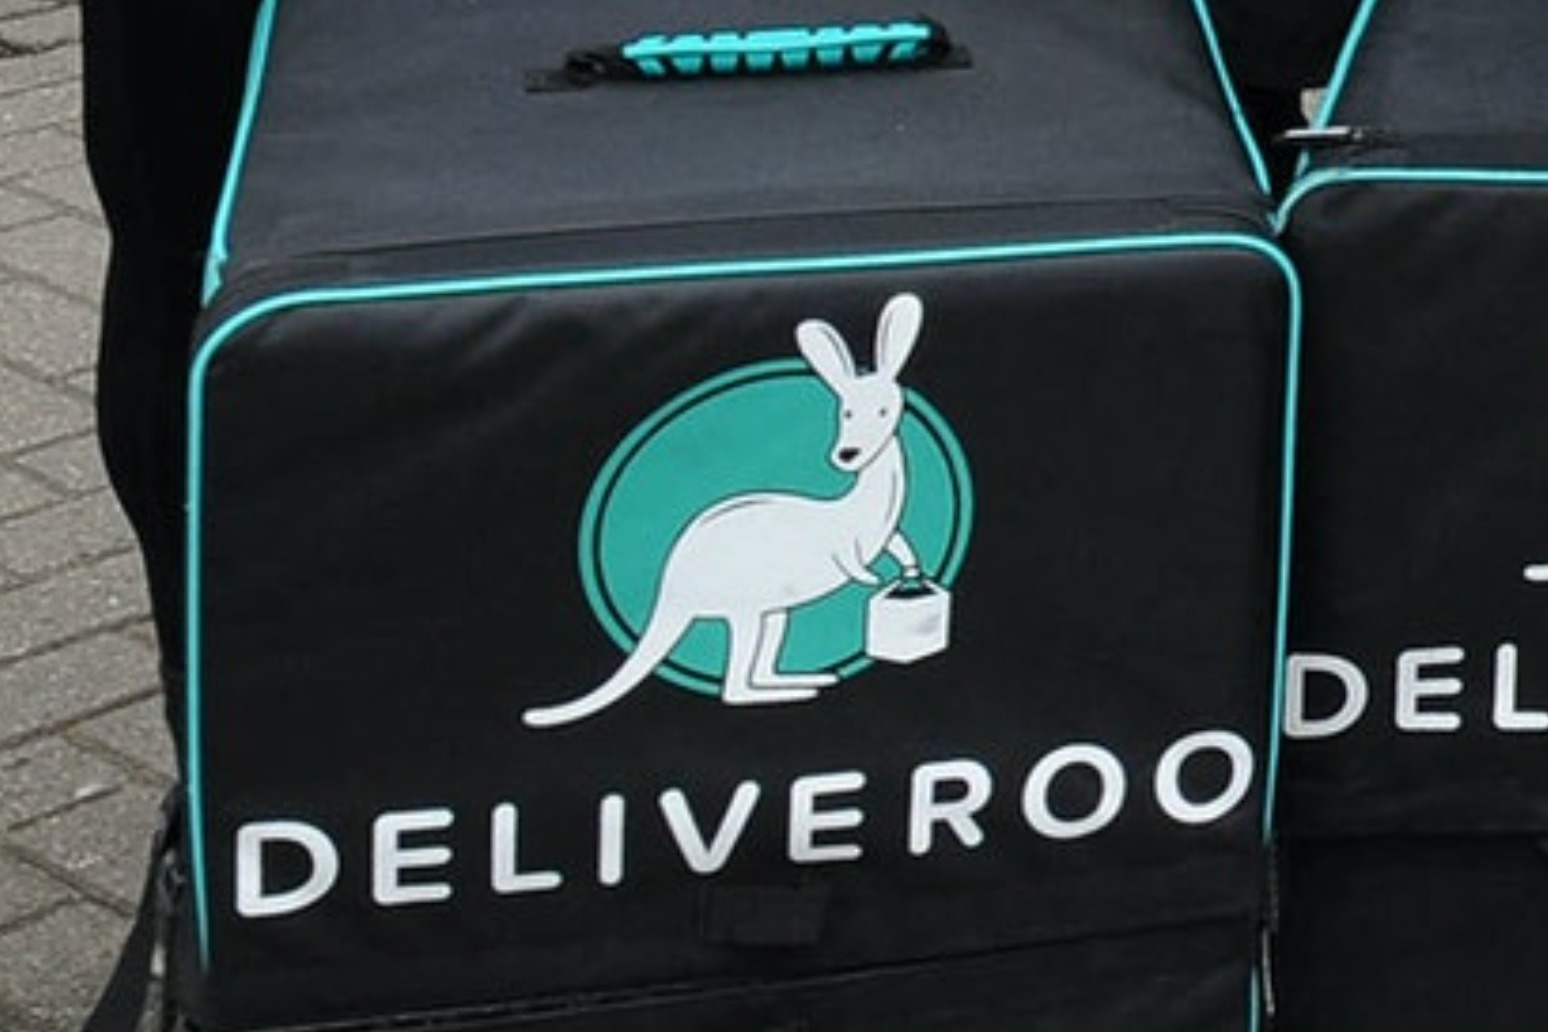 Deliveroo dishes up first ever gift card 